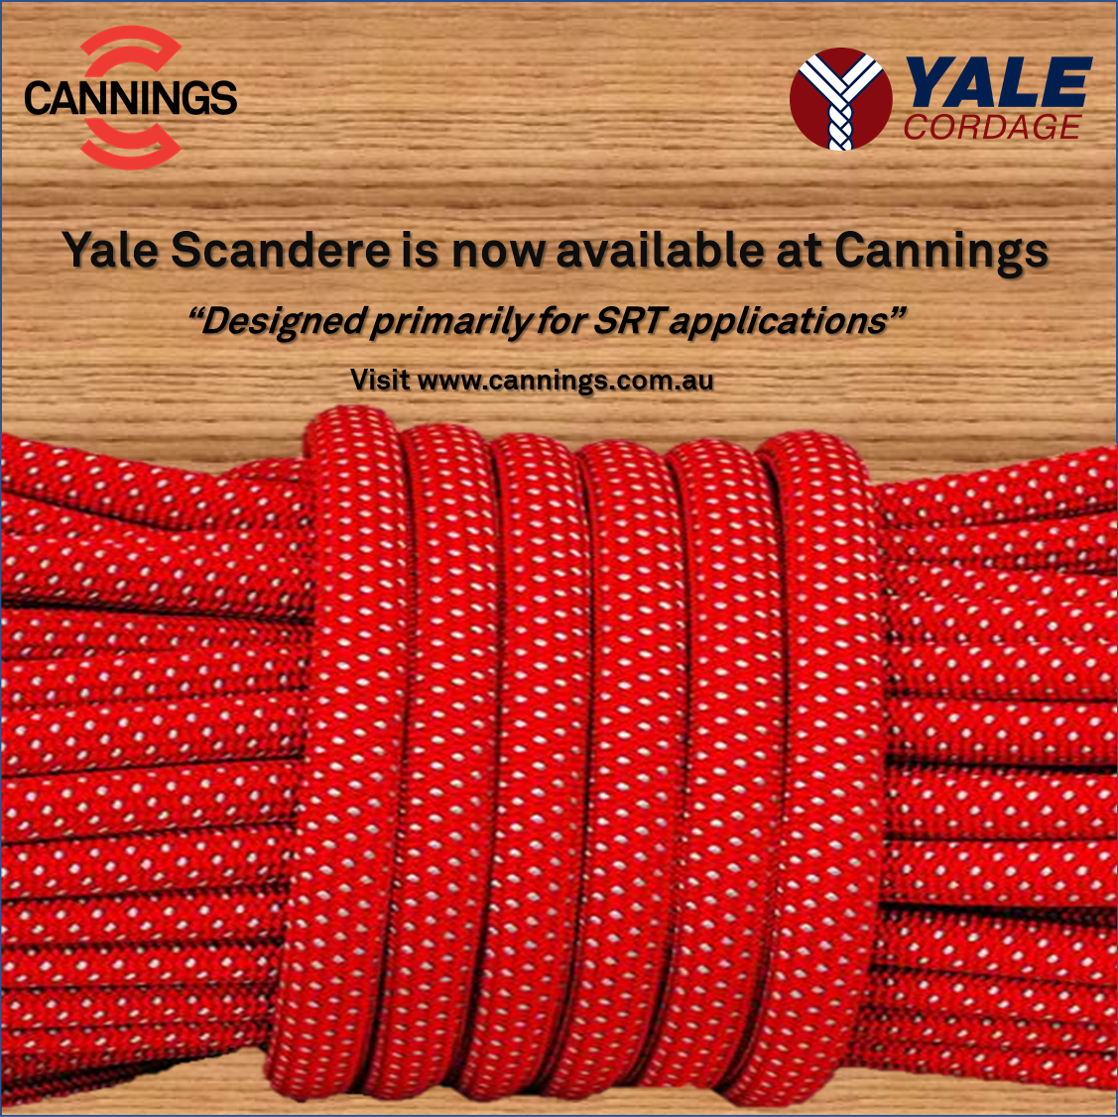 Yale Scandere now available